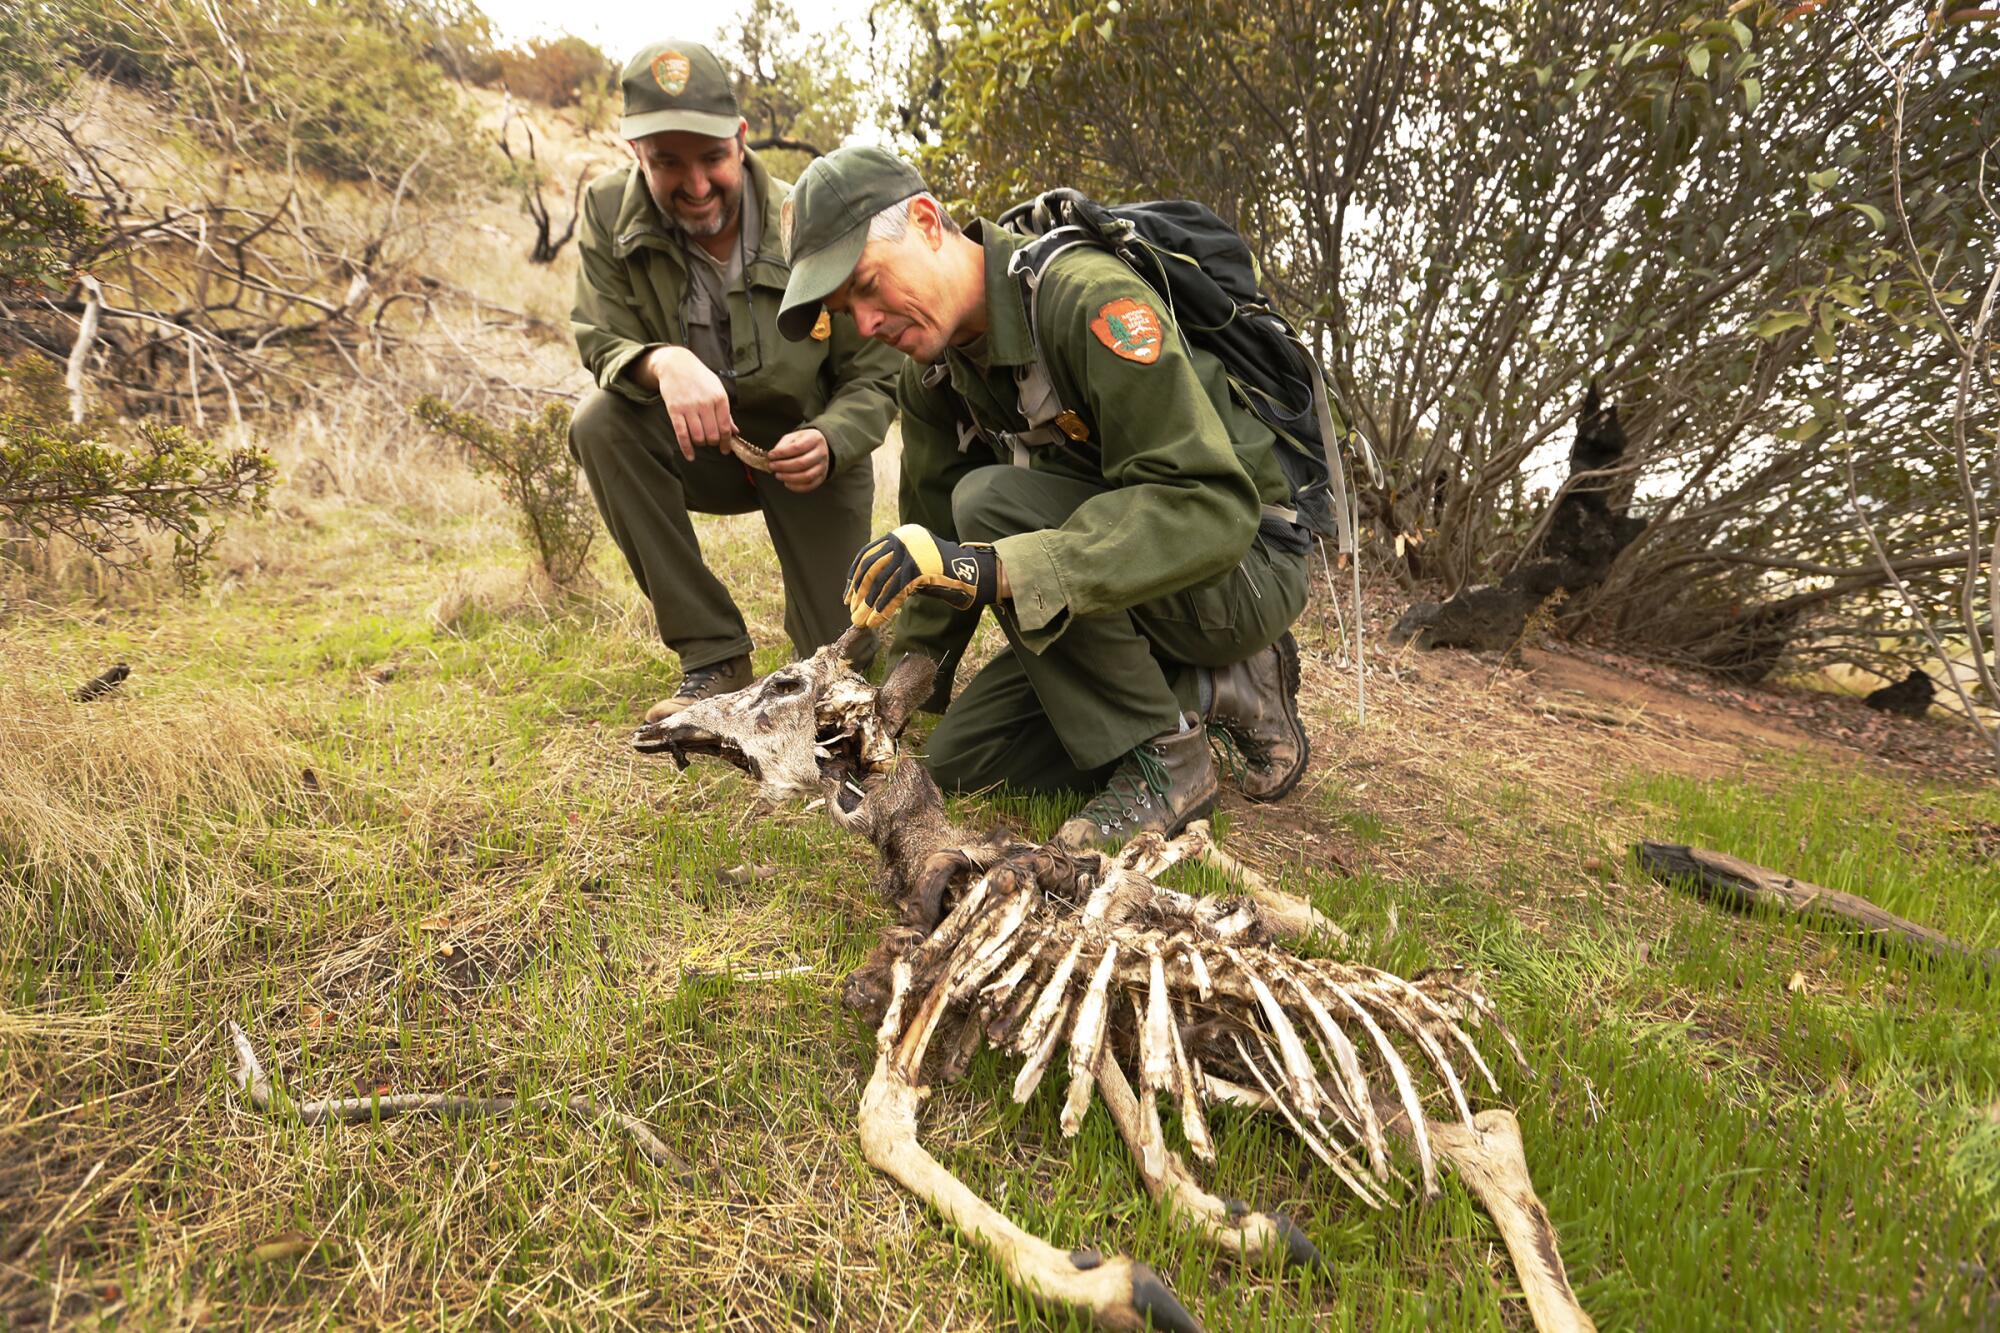 Two men check the skeletal remains of a small deer on a grassy hillside